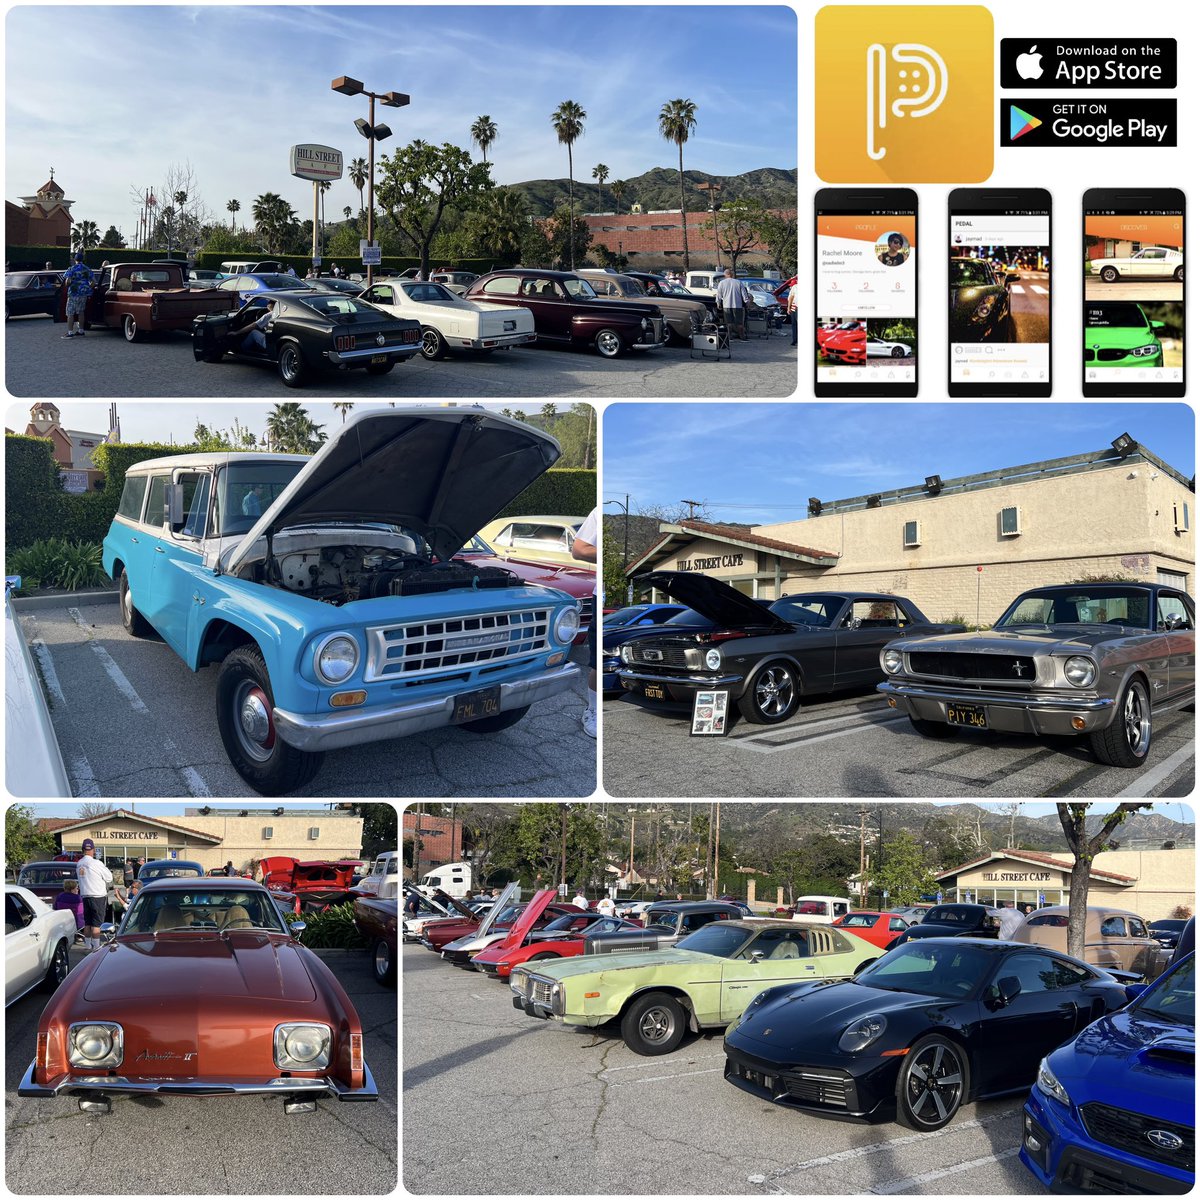 🔶 Whiskey and Wheels Classic Car Meet ~ @hillstreetcafe 
🔶 See more on PEDAL - Free in app stores

#whiskeyandwheels #hillstreetcafe #burbank #carshow #carmeet #classiccars #exoticcars #musclecar #carcollection #carporn #carculture #carlifestyle #pedaltheap